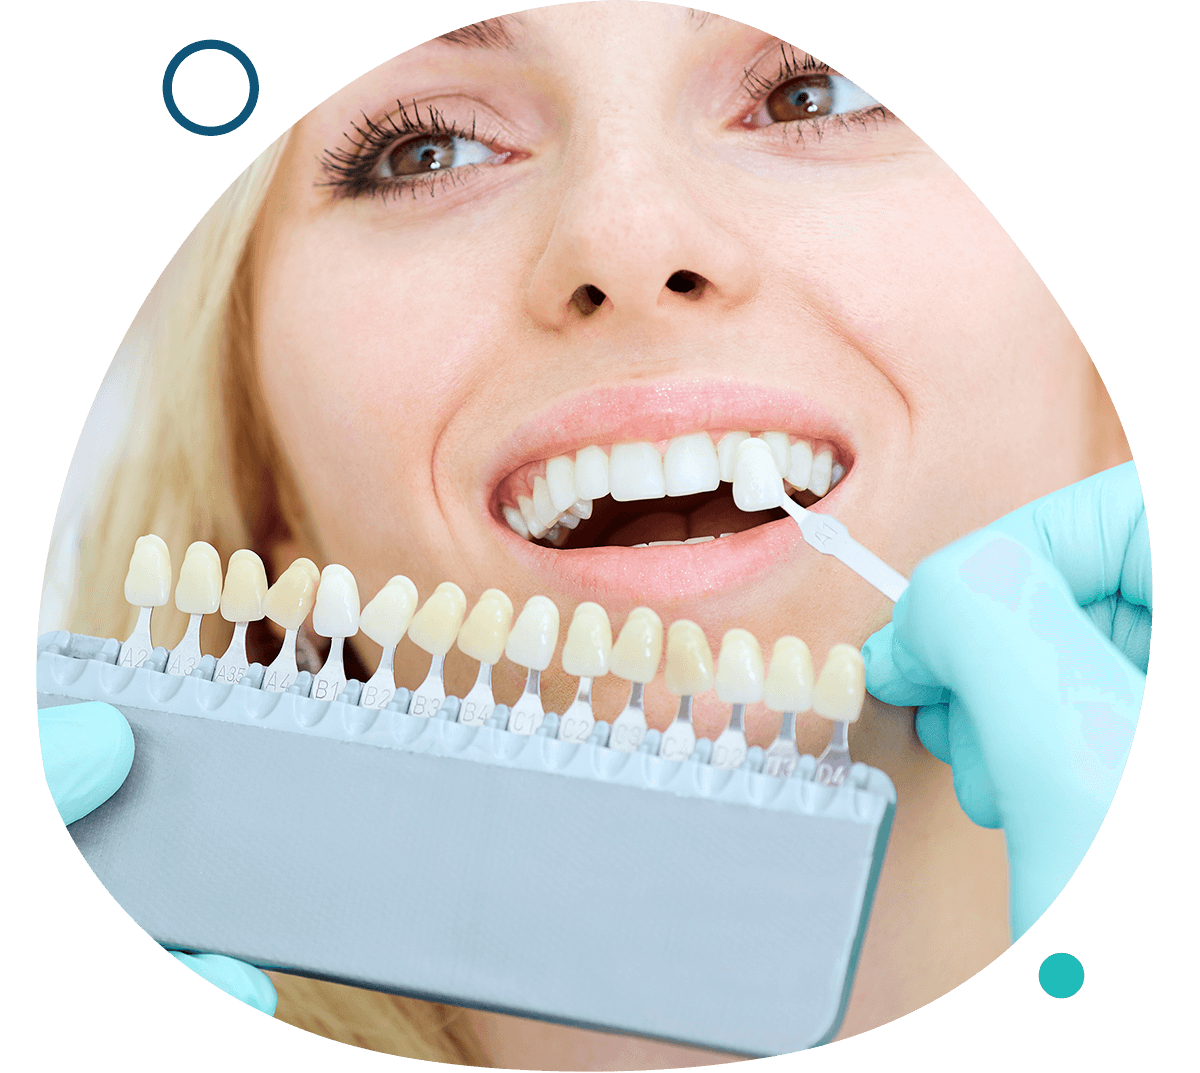 http://alwaysharmonydental.com/wp-content/uploads/2020/01/home-service-4.png